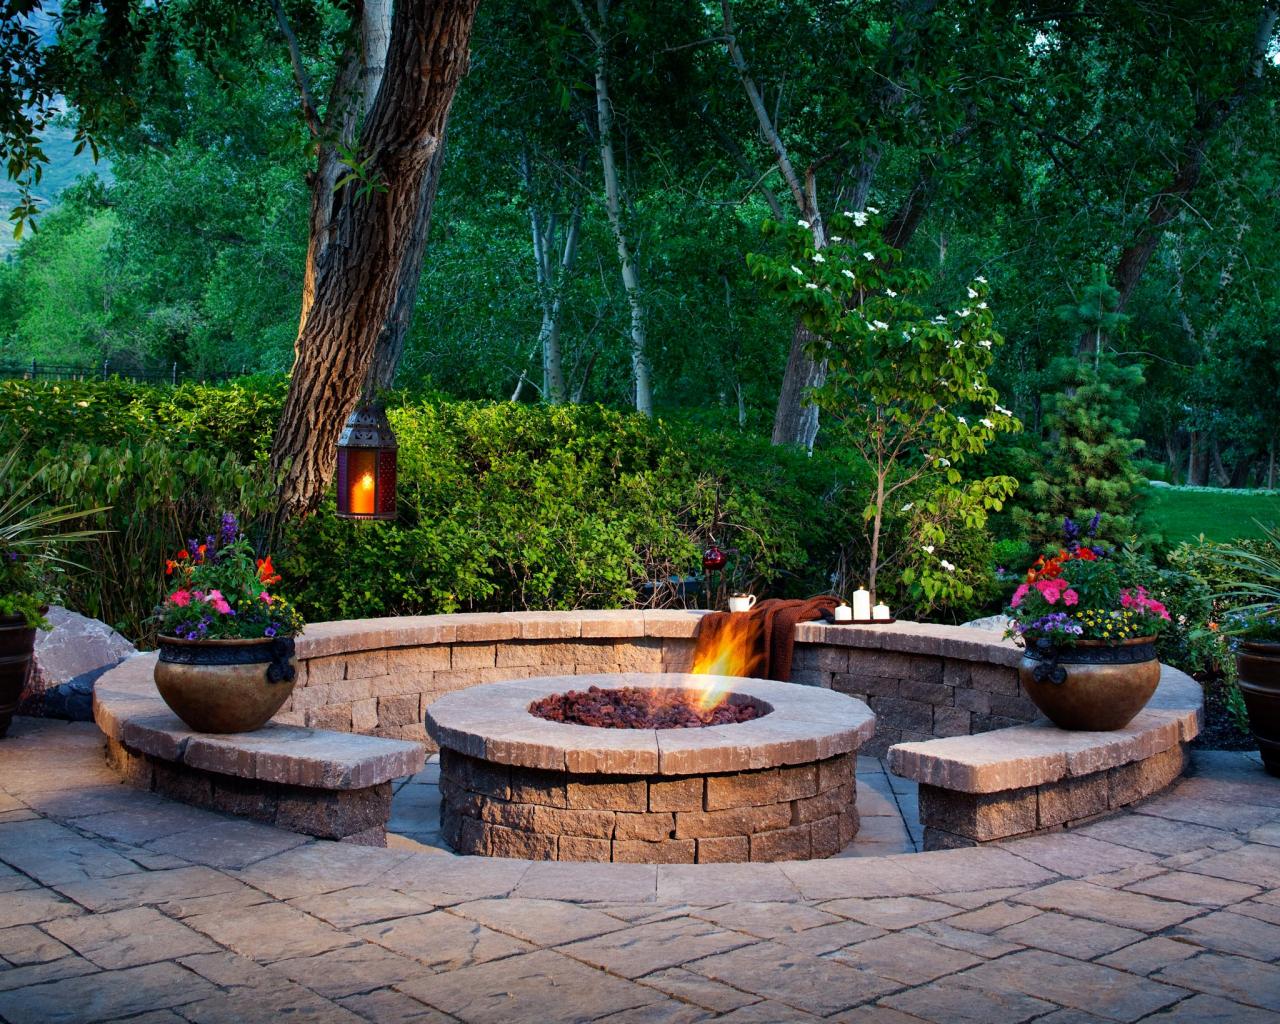 Designing A Patio Around Fire Pit Diy, Seating Around Fire Pit Ideas